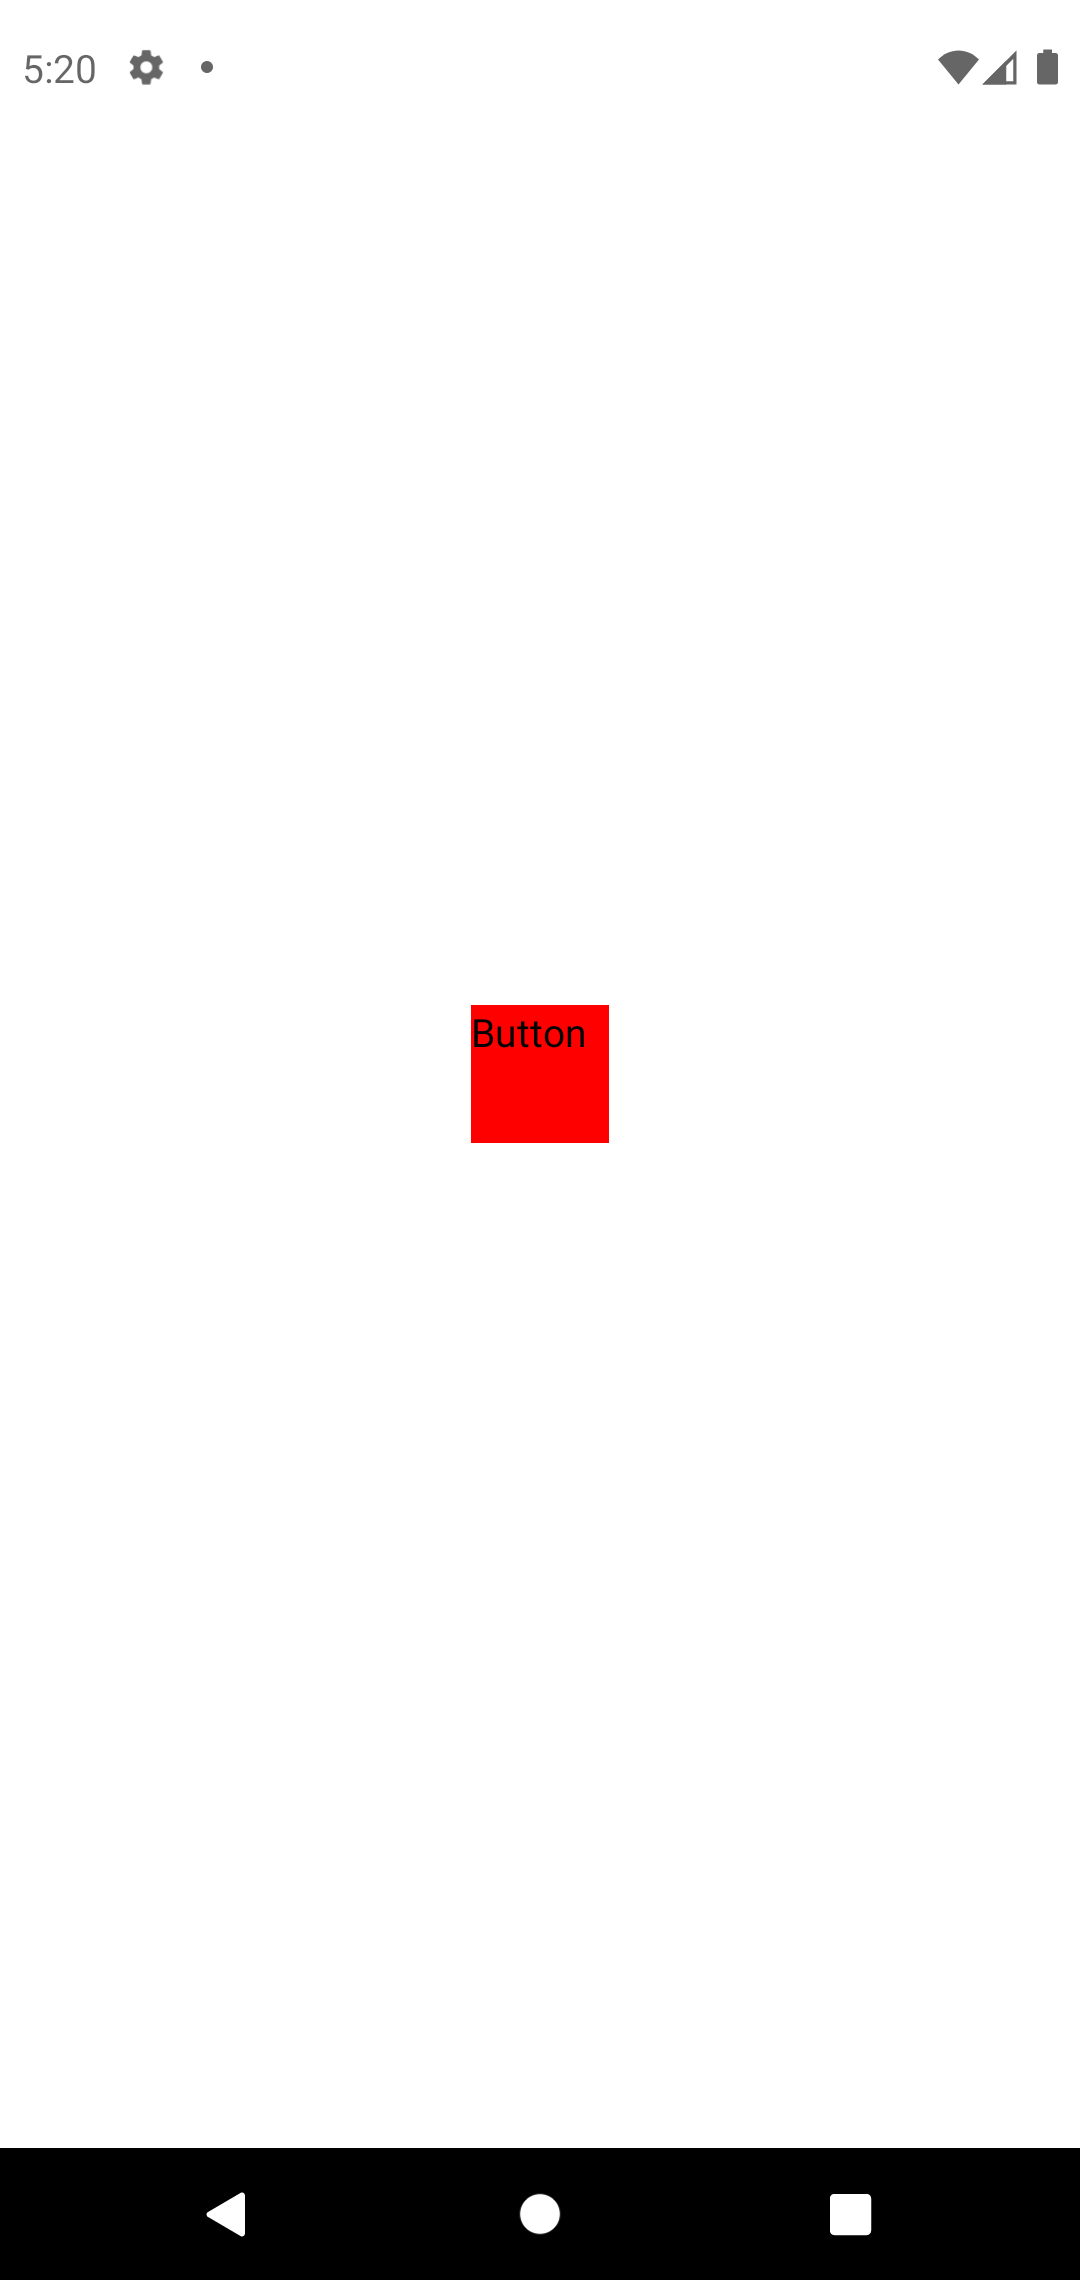 An Android Simulator Screen showing a red square in the middle.